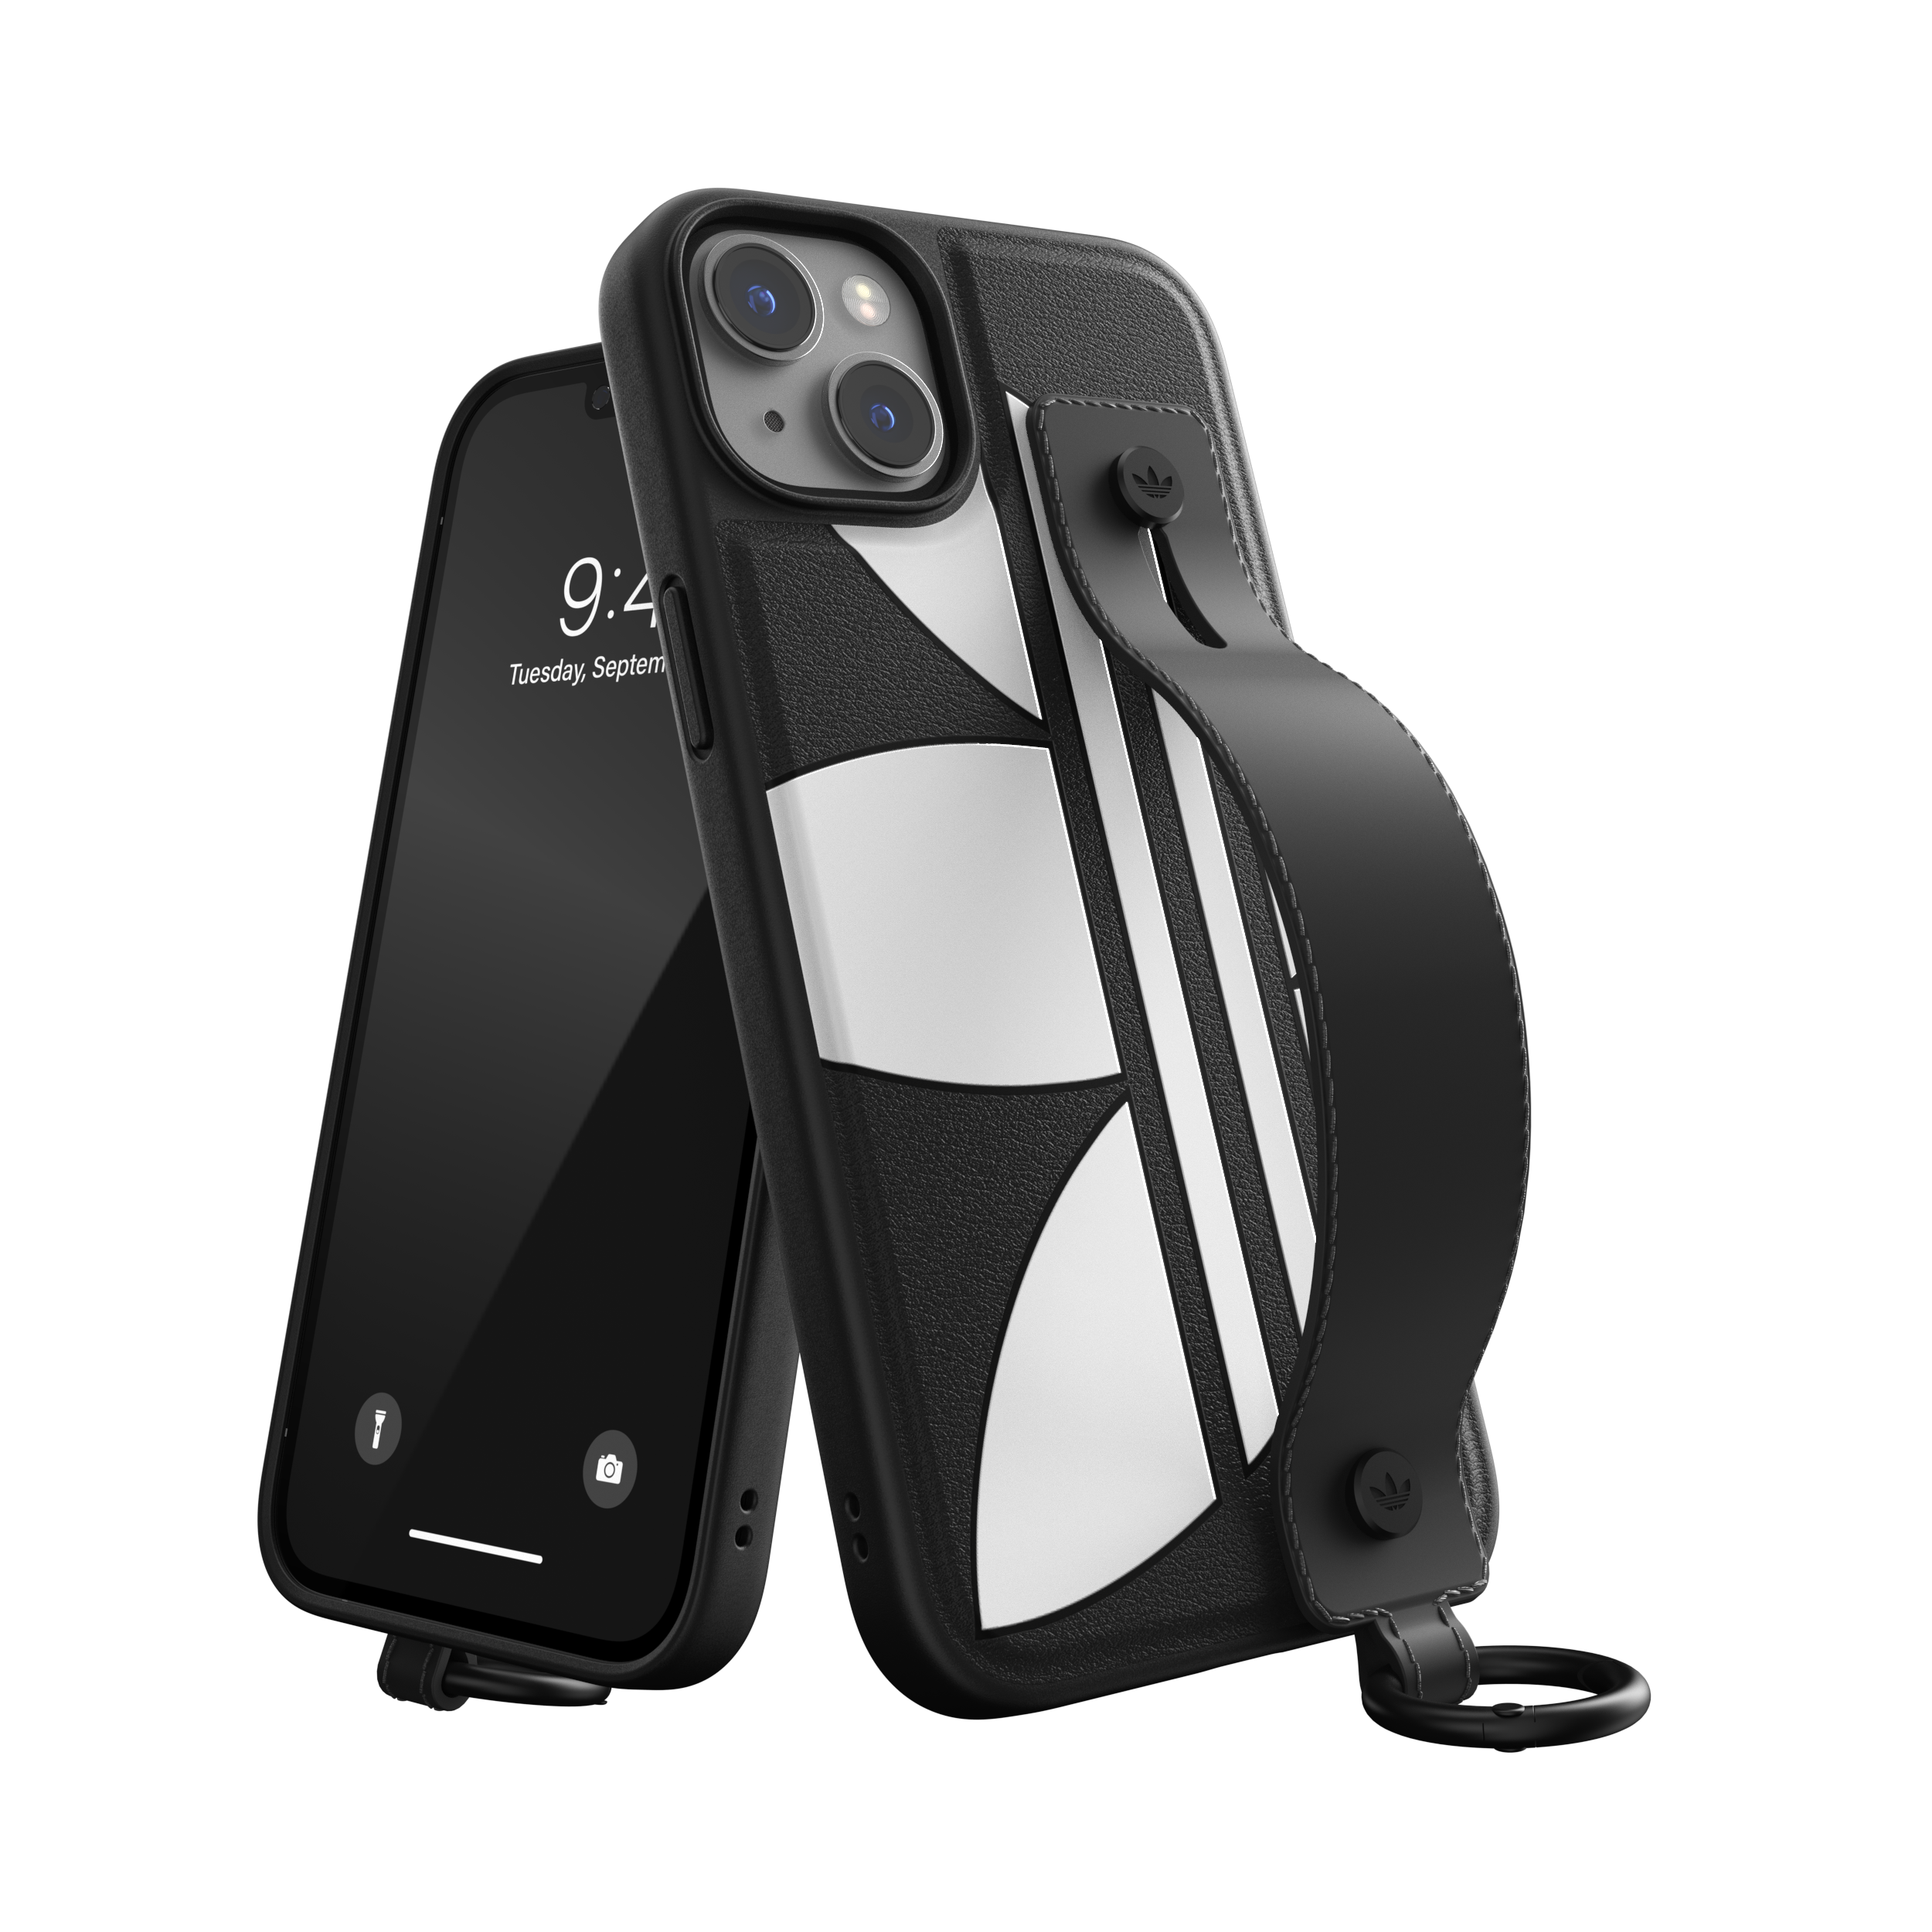 Backcover, ADIDAS 14 PLUS, handstrap IPHONE case APPLE, new, BLACK